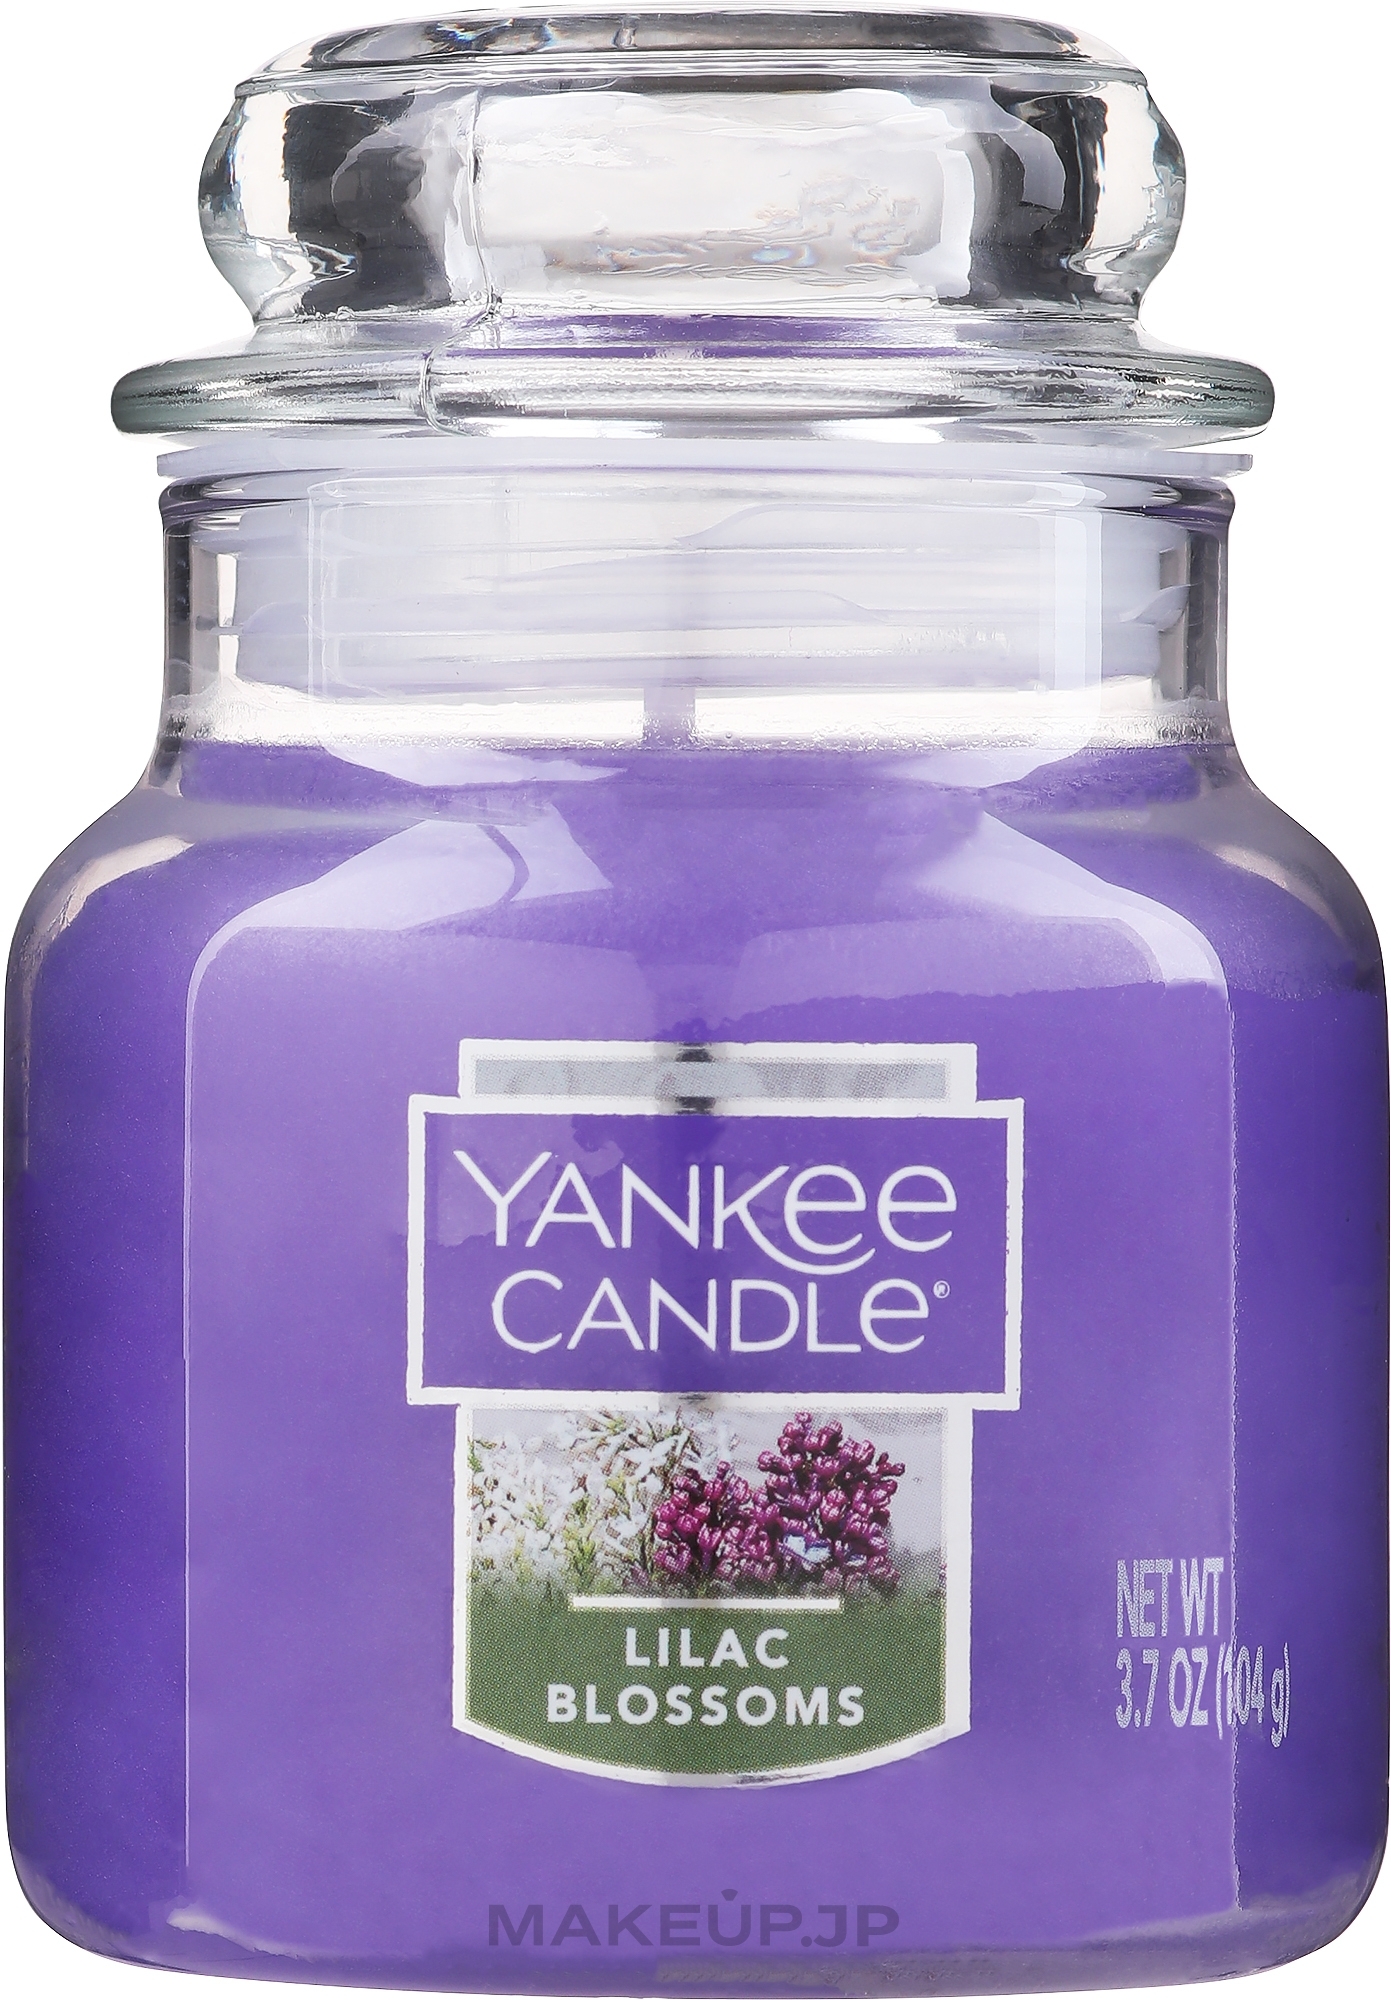 Scented Candle in Jar "Lilac Blossom" - Yankee Candle Lilac Blossoms — photo 104 g